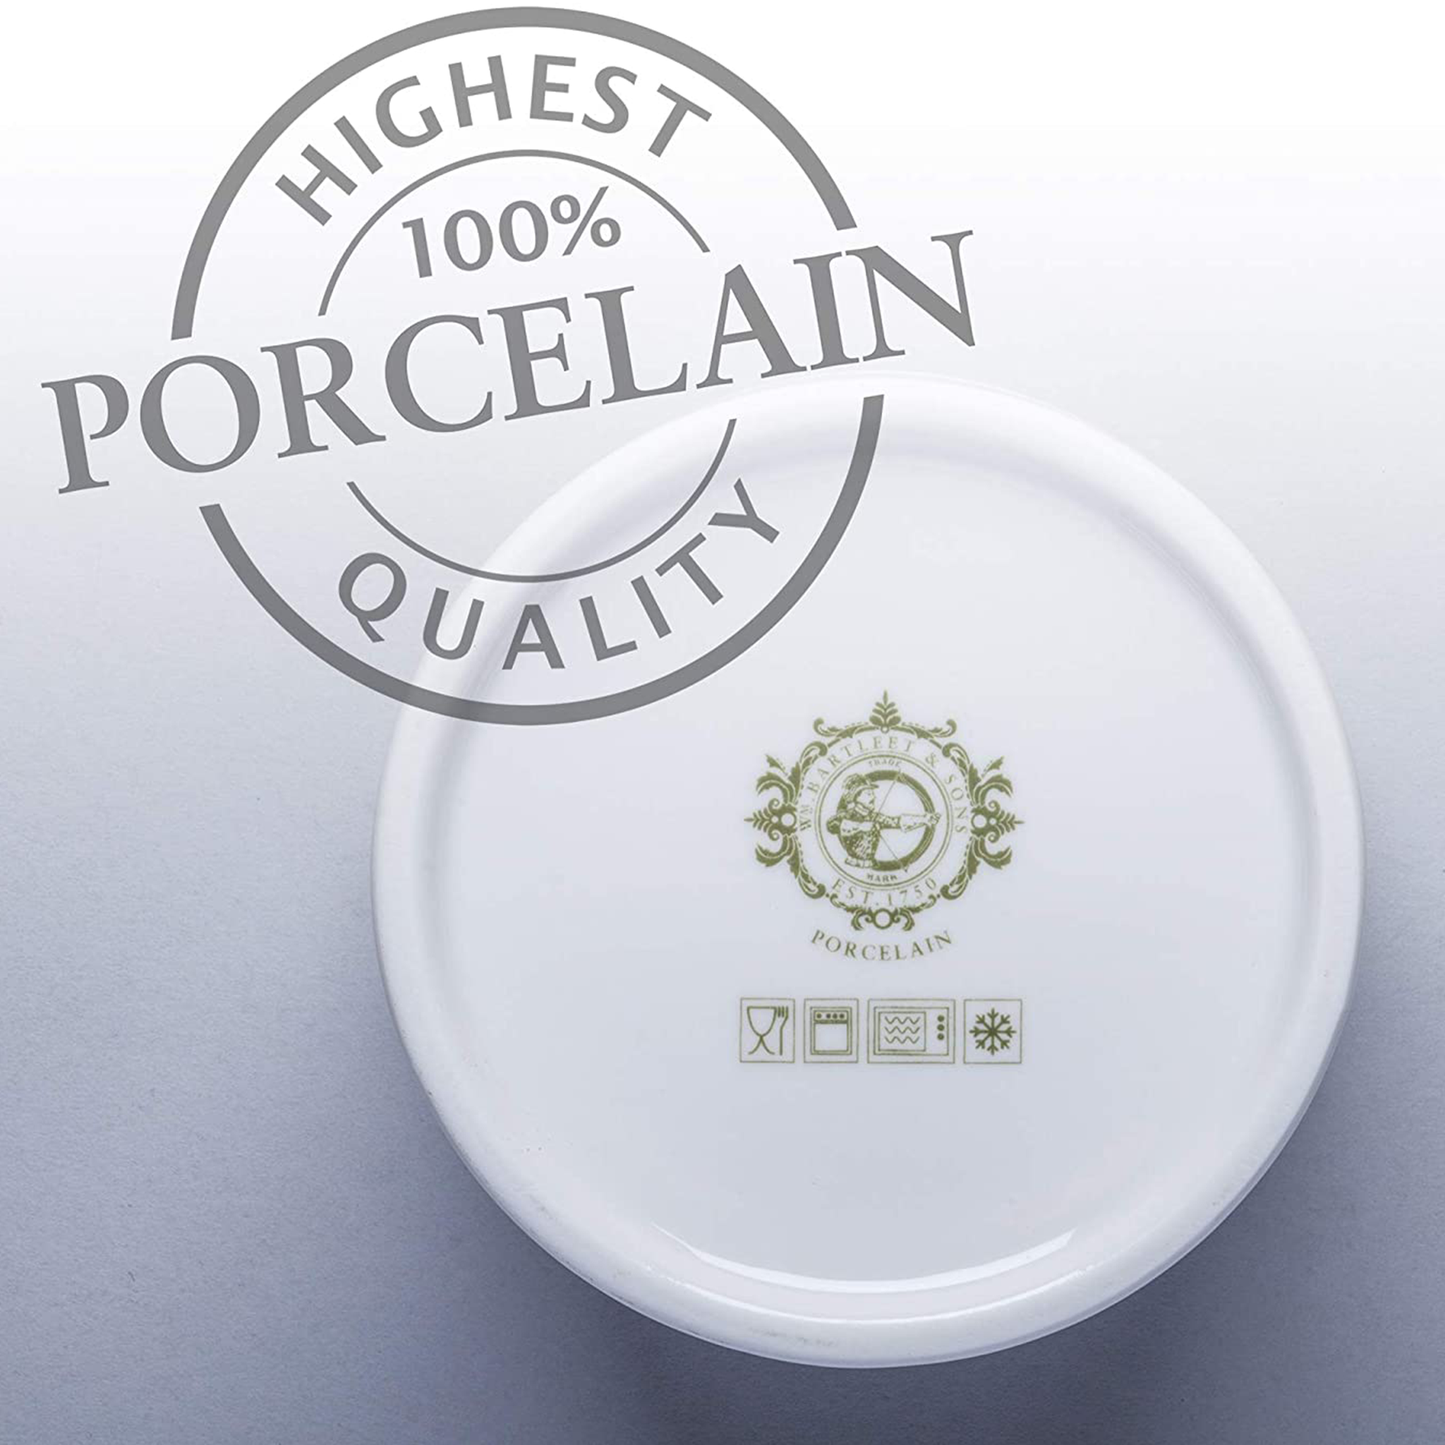 the 100% porcelian stamp at the bottom of the pot